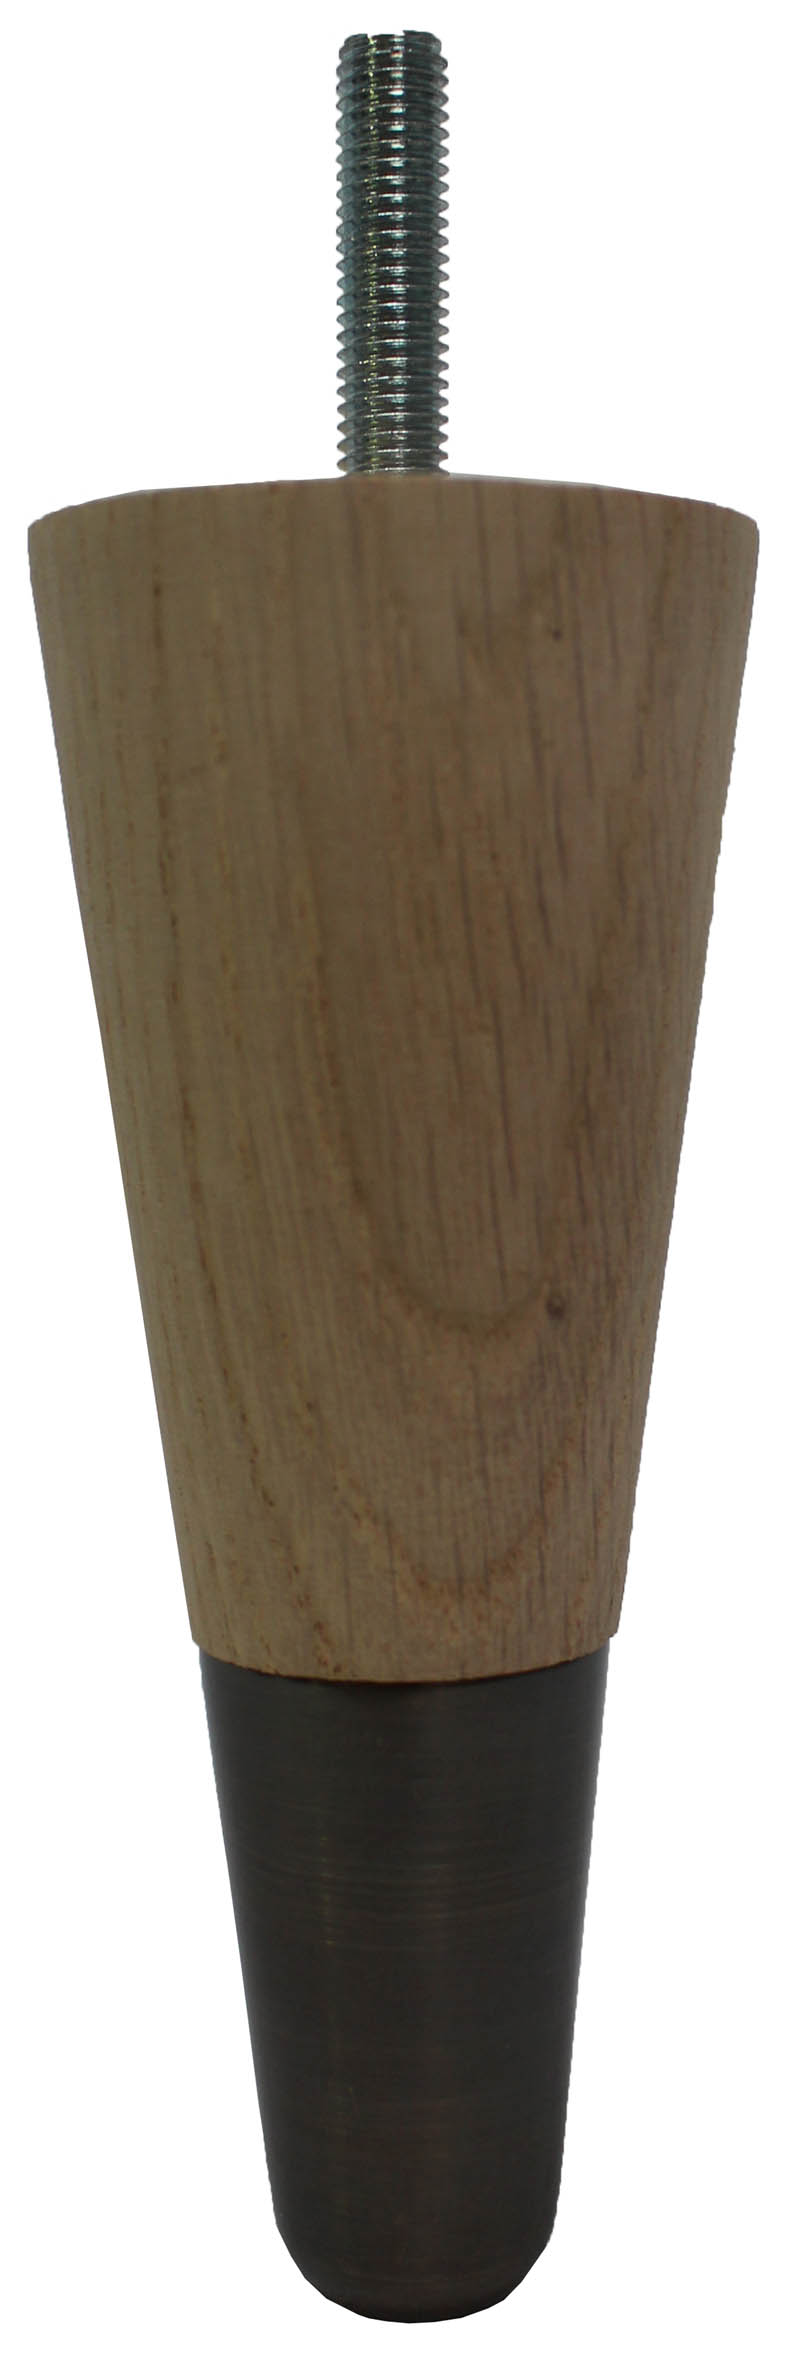 Amaryllis Solid Oak Tapered Furniture Legs - Raw Finish - Antique Slipper Cups - Set of 4